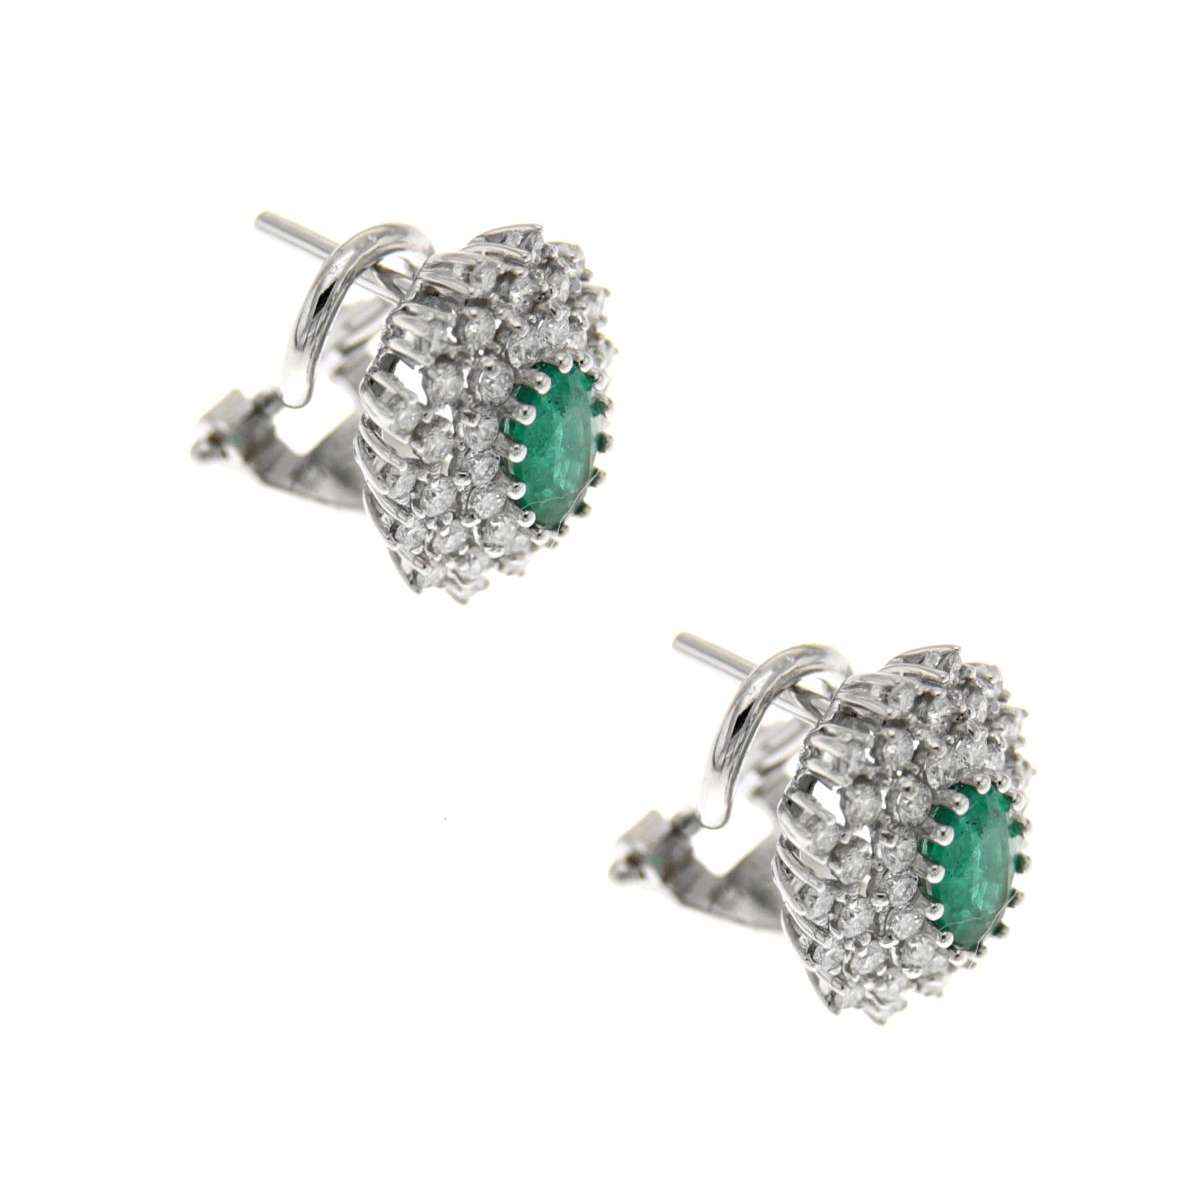 Earrings with 0.93 carat emeralds and 0.90 carat diamonds g-vs1